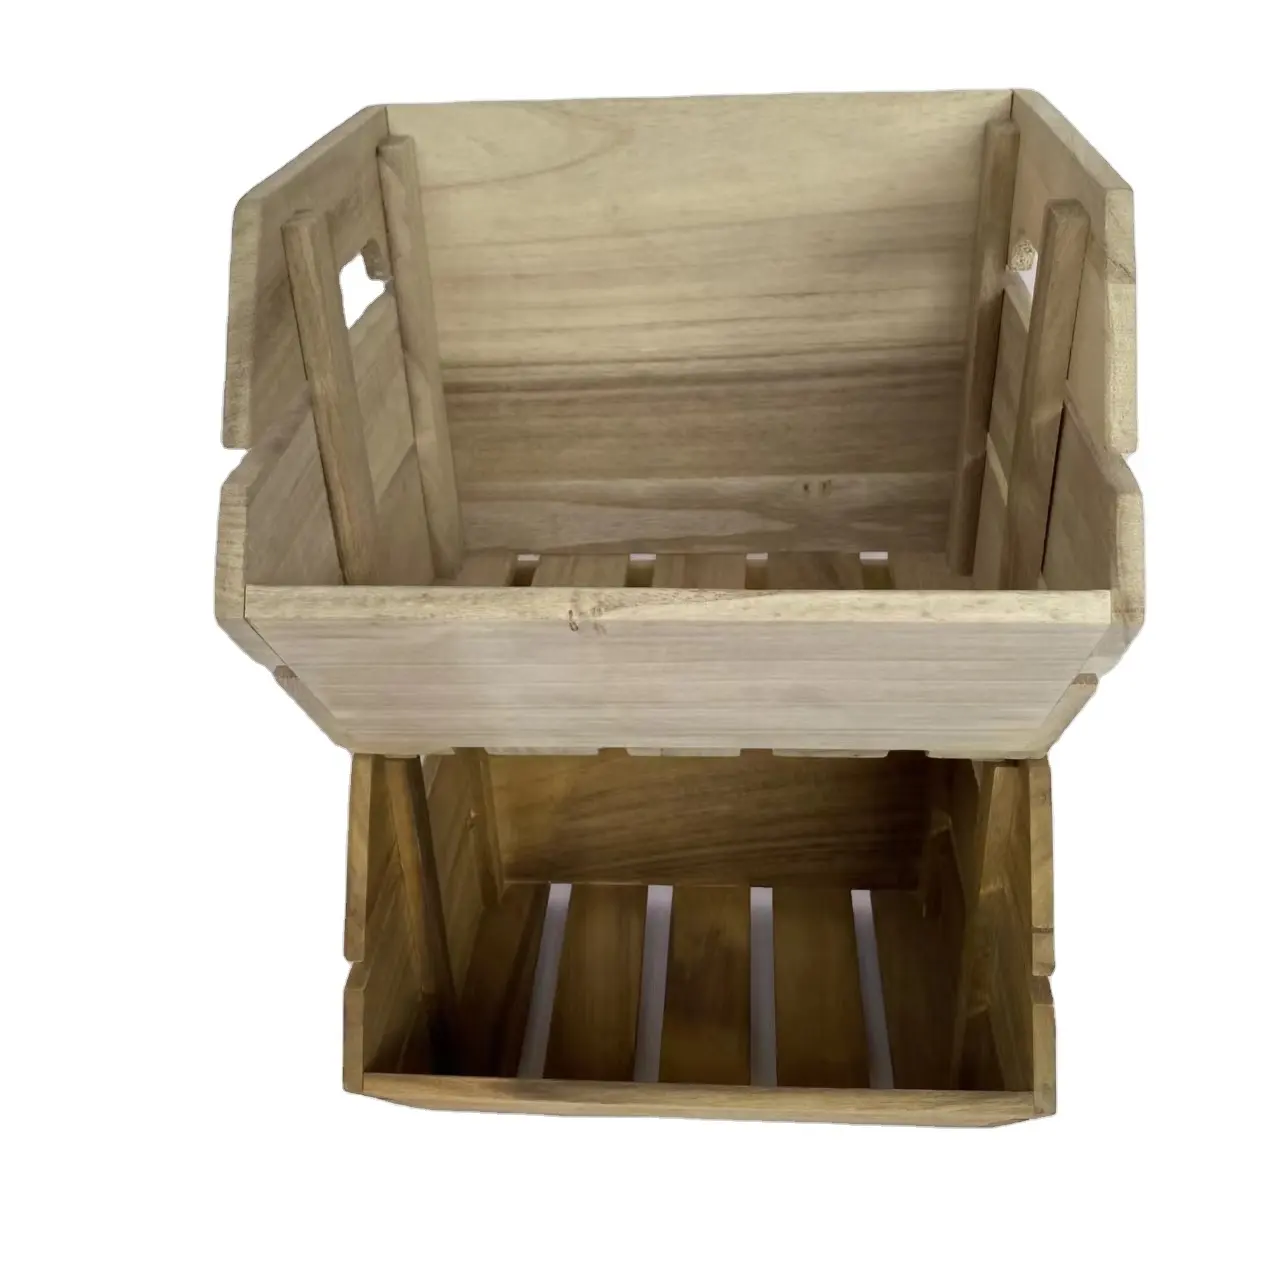 Customized Wooden Open Front Storage Bin for Kitchen & Pantry Vegetable organizer Fruit Basket on Countertop